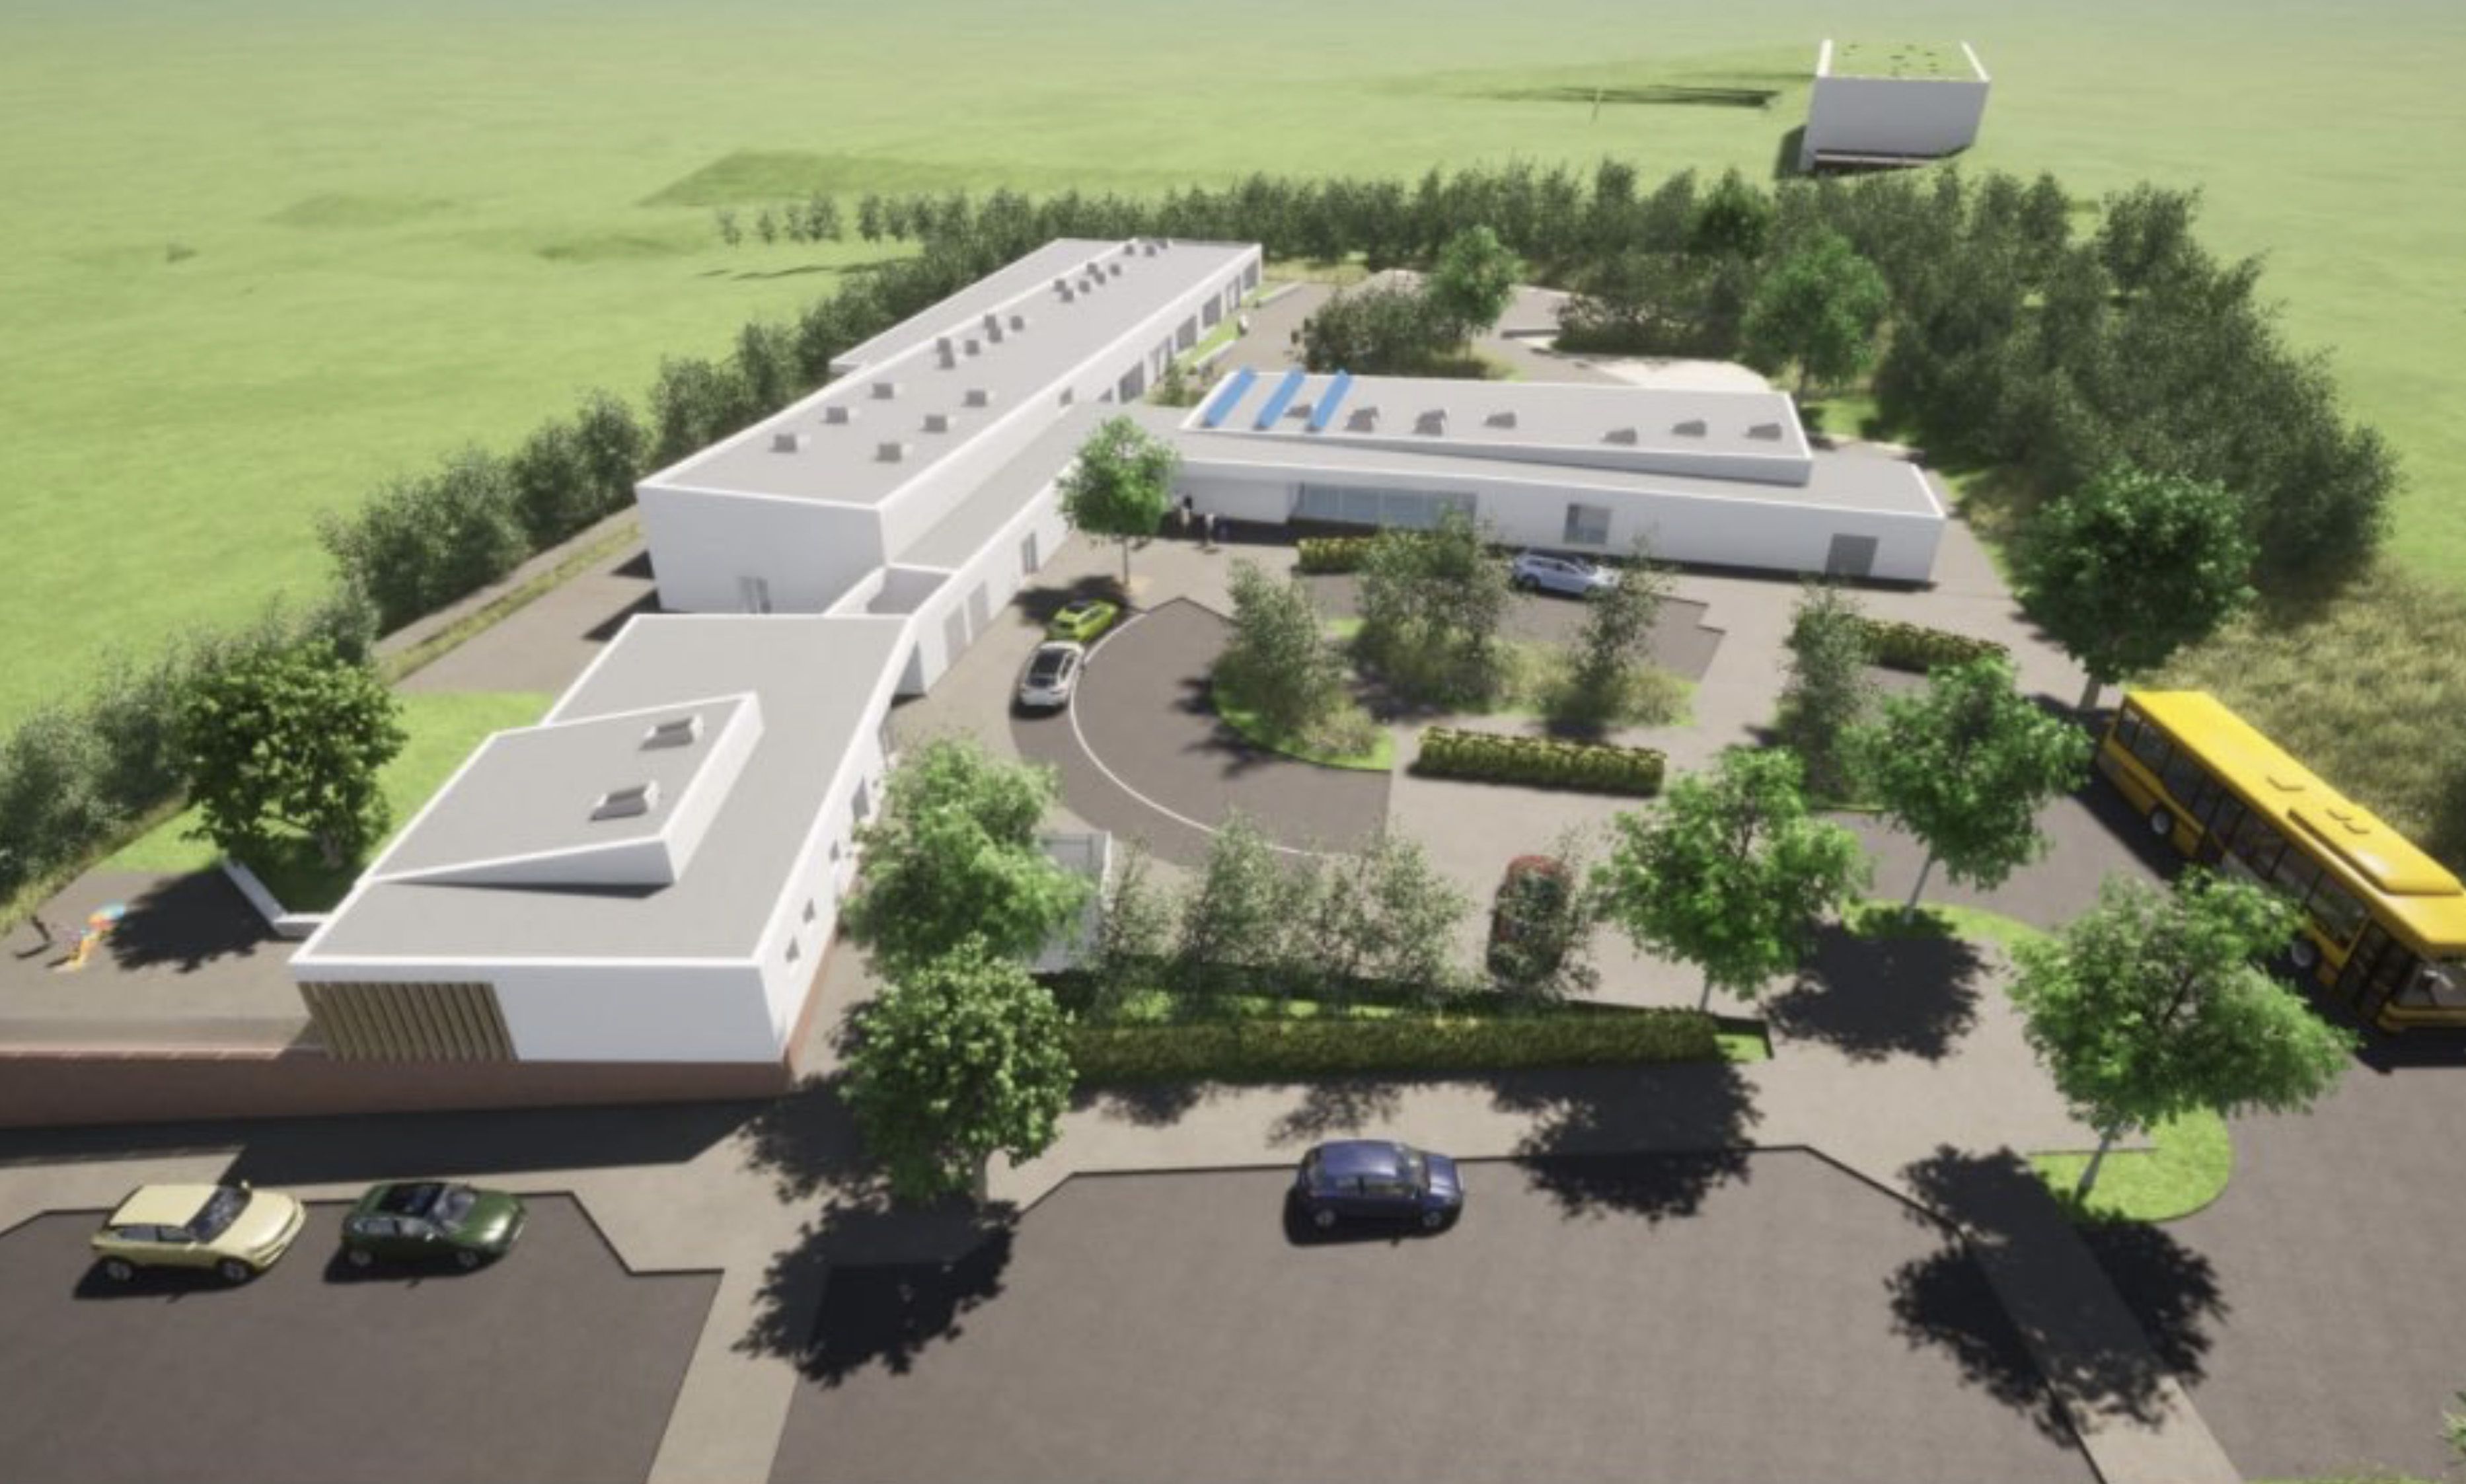 ARTIST IMPRESSION: The new primary school and nursery unit for Gaelscoil and Naíscoil Éanna in Glengormley